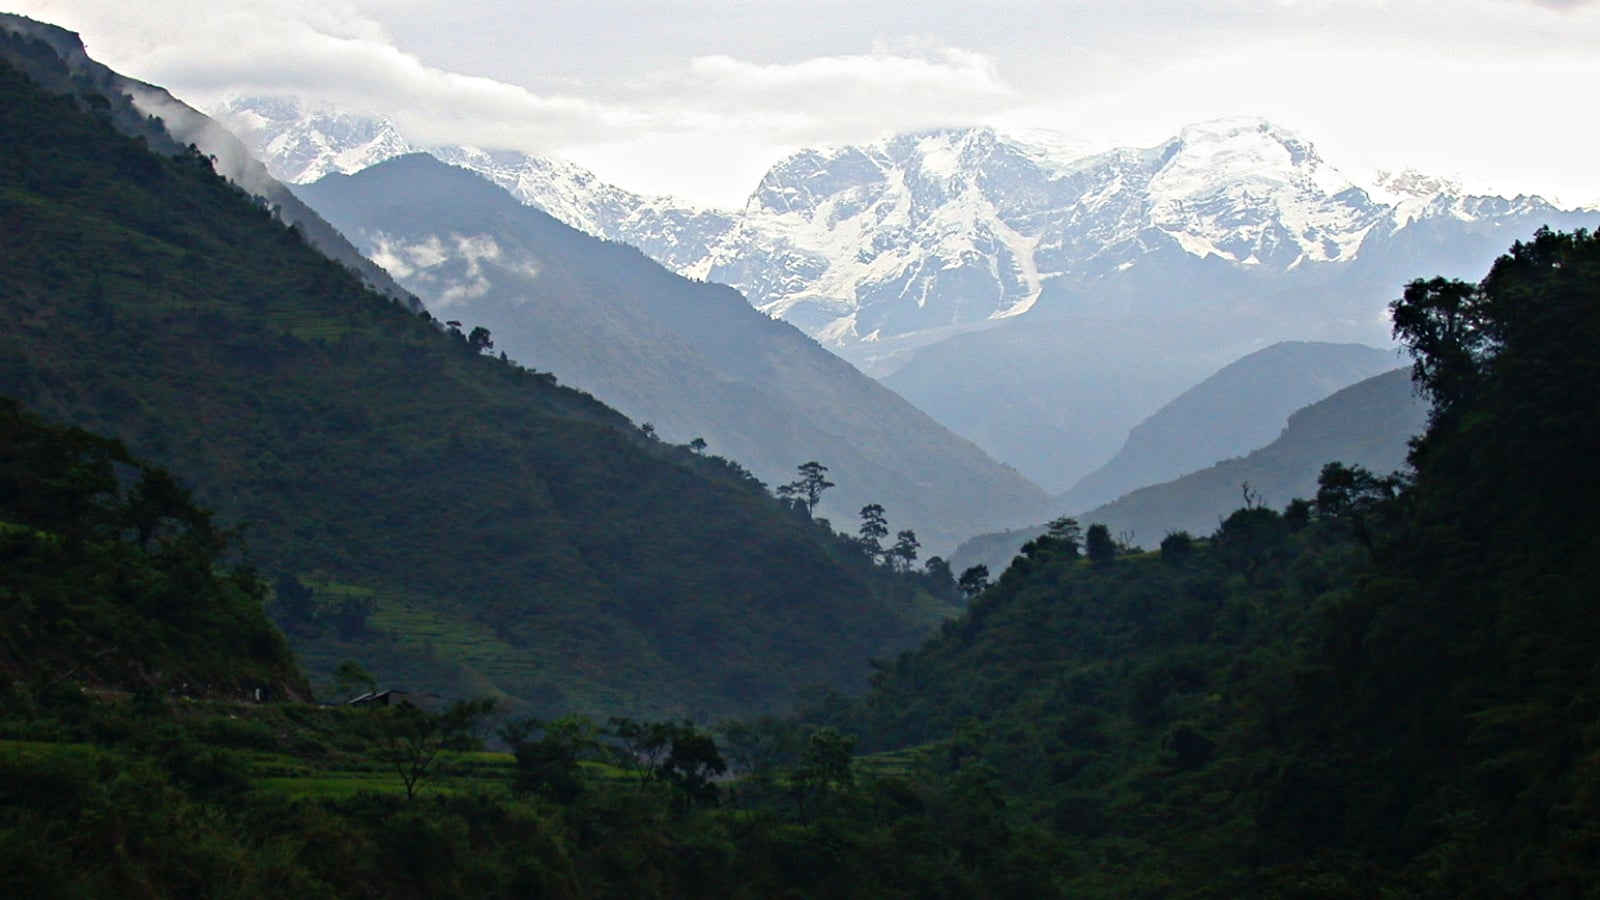 Heading out of the lowlands on the Annapurna Circuit